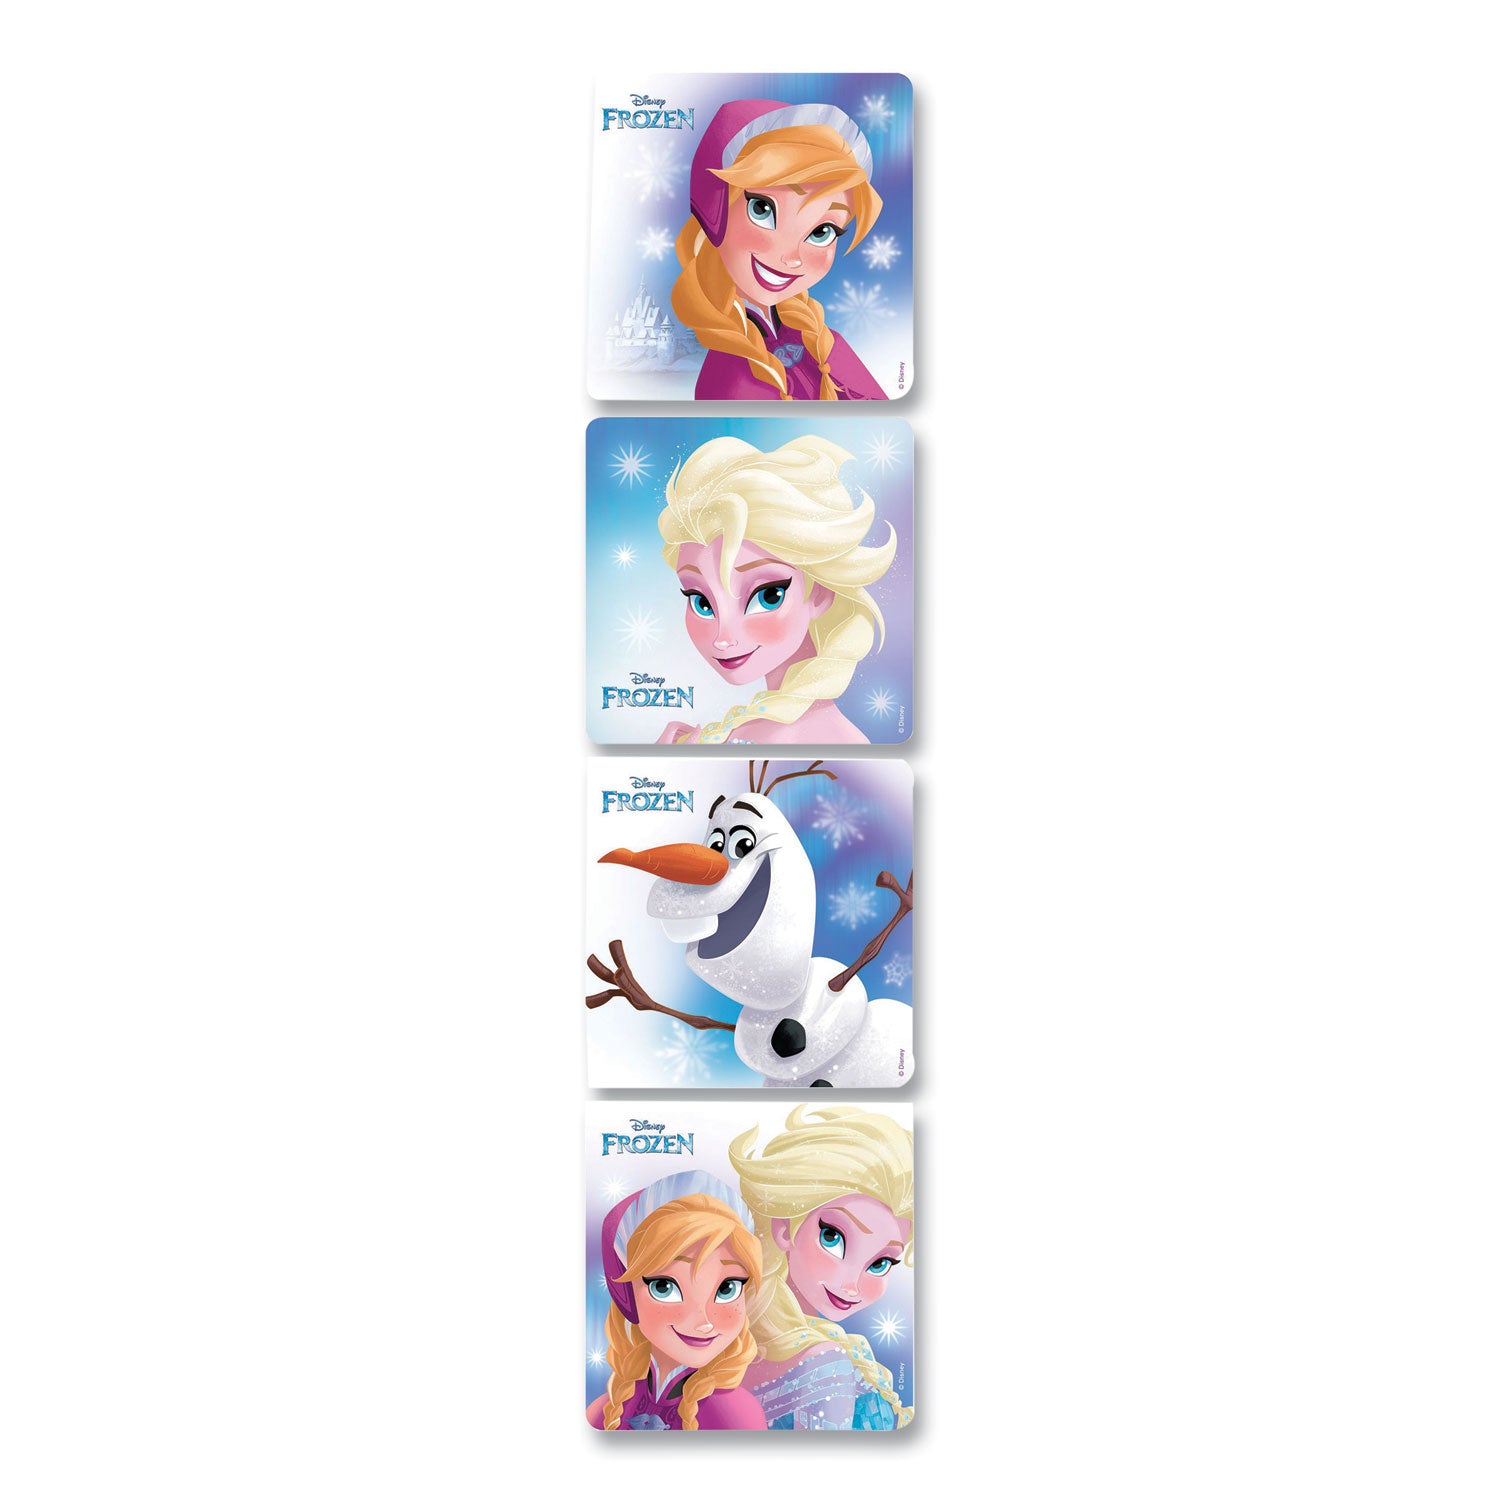 frozen-stickers-assorted-colors-in-four-scenes-250-roll_lonmm8000 - 1